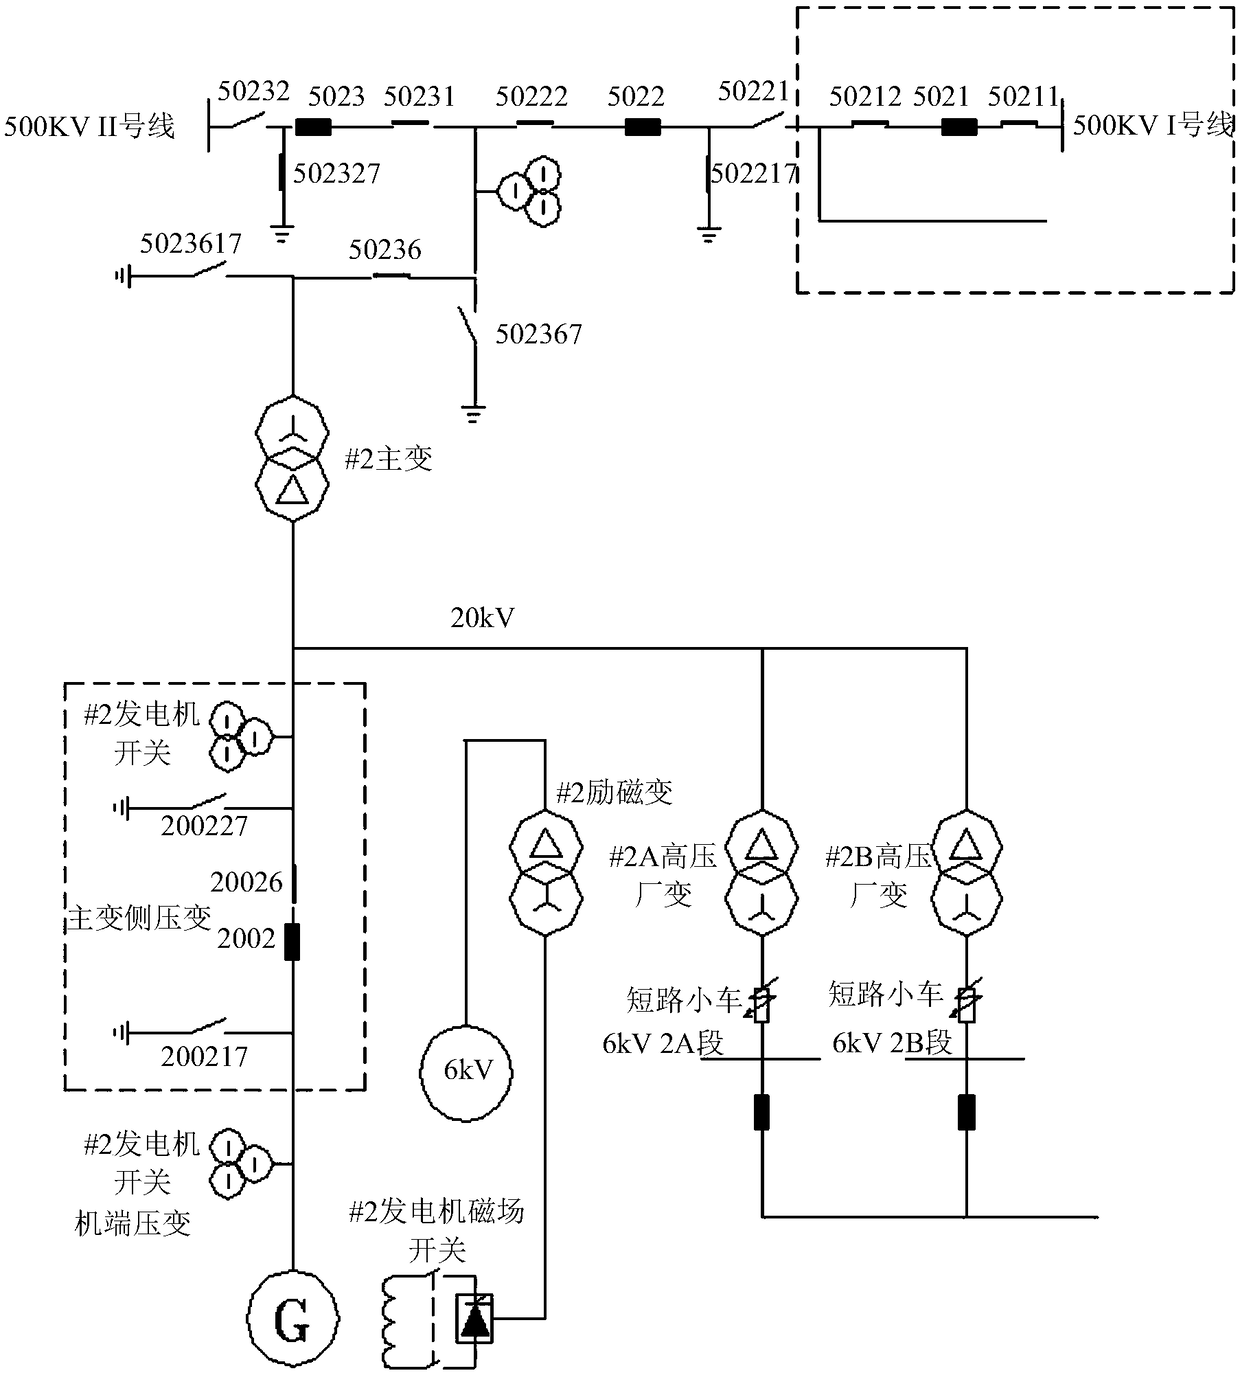 Polarity testing method for differential protection of generator-transformer set